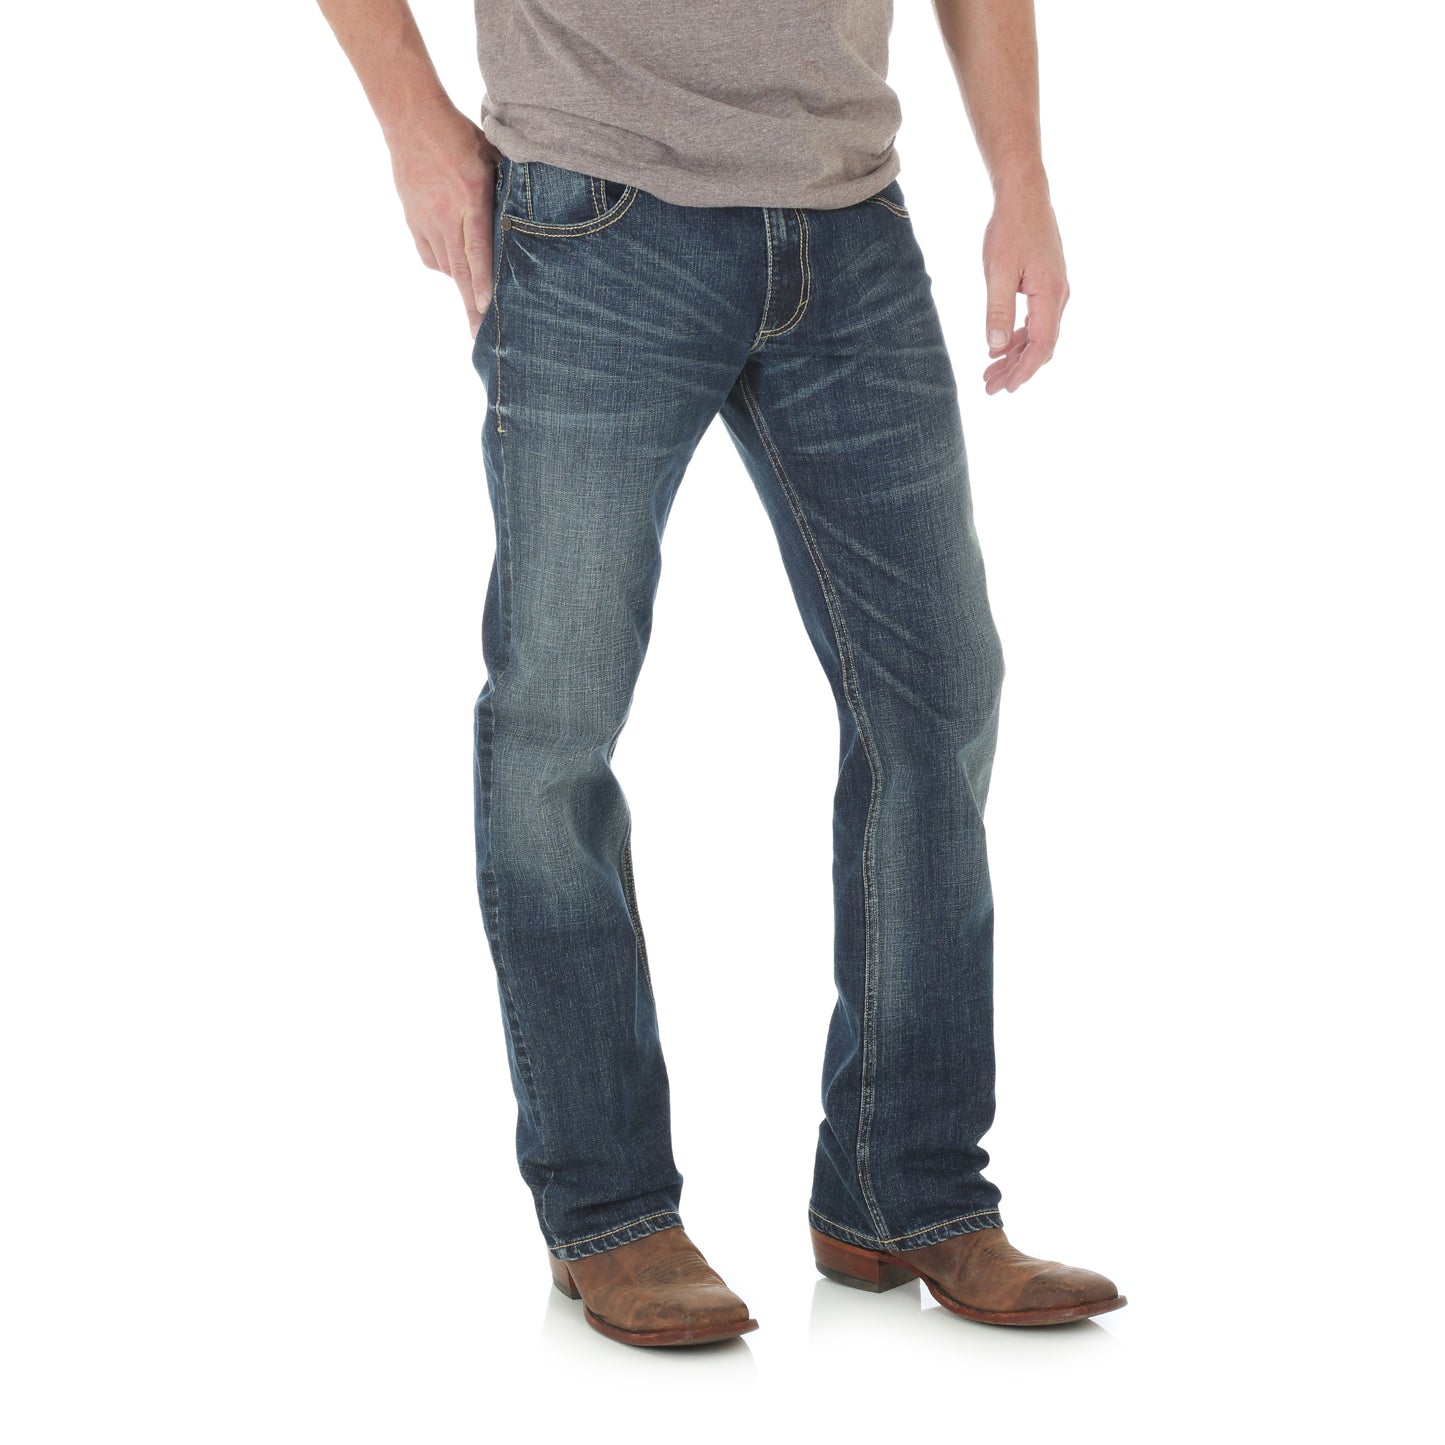 Wrangler Men's Retro Limited Edition Slim Bootcut Jean #WLT77LY